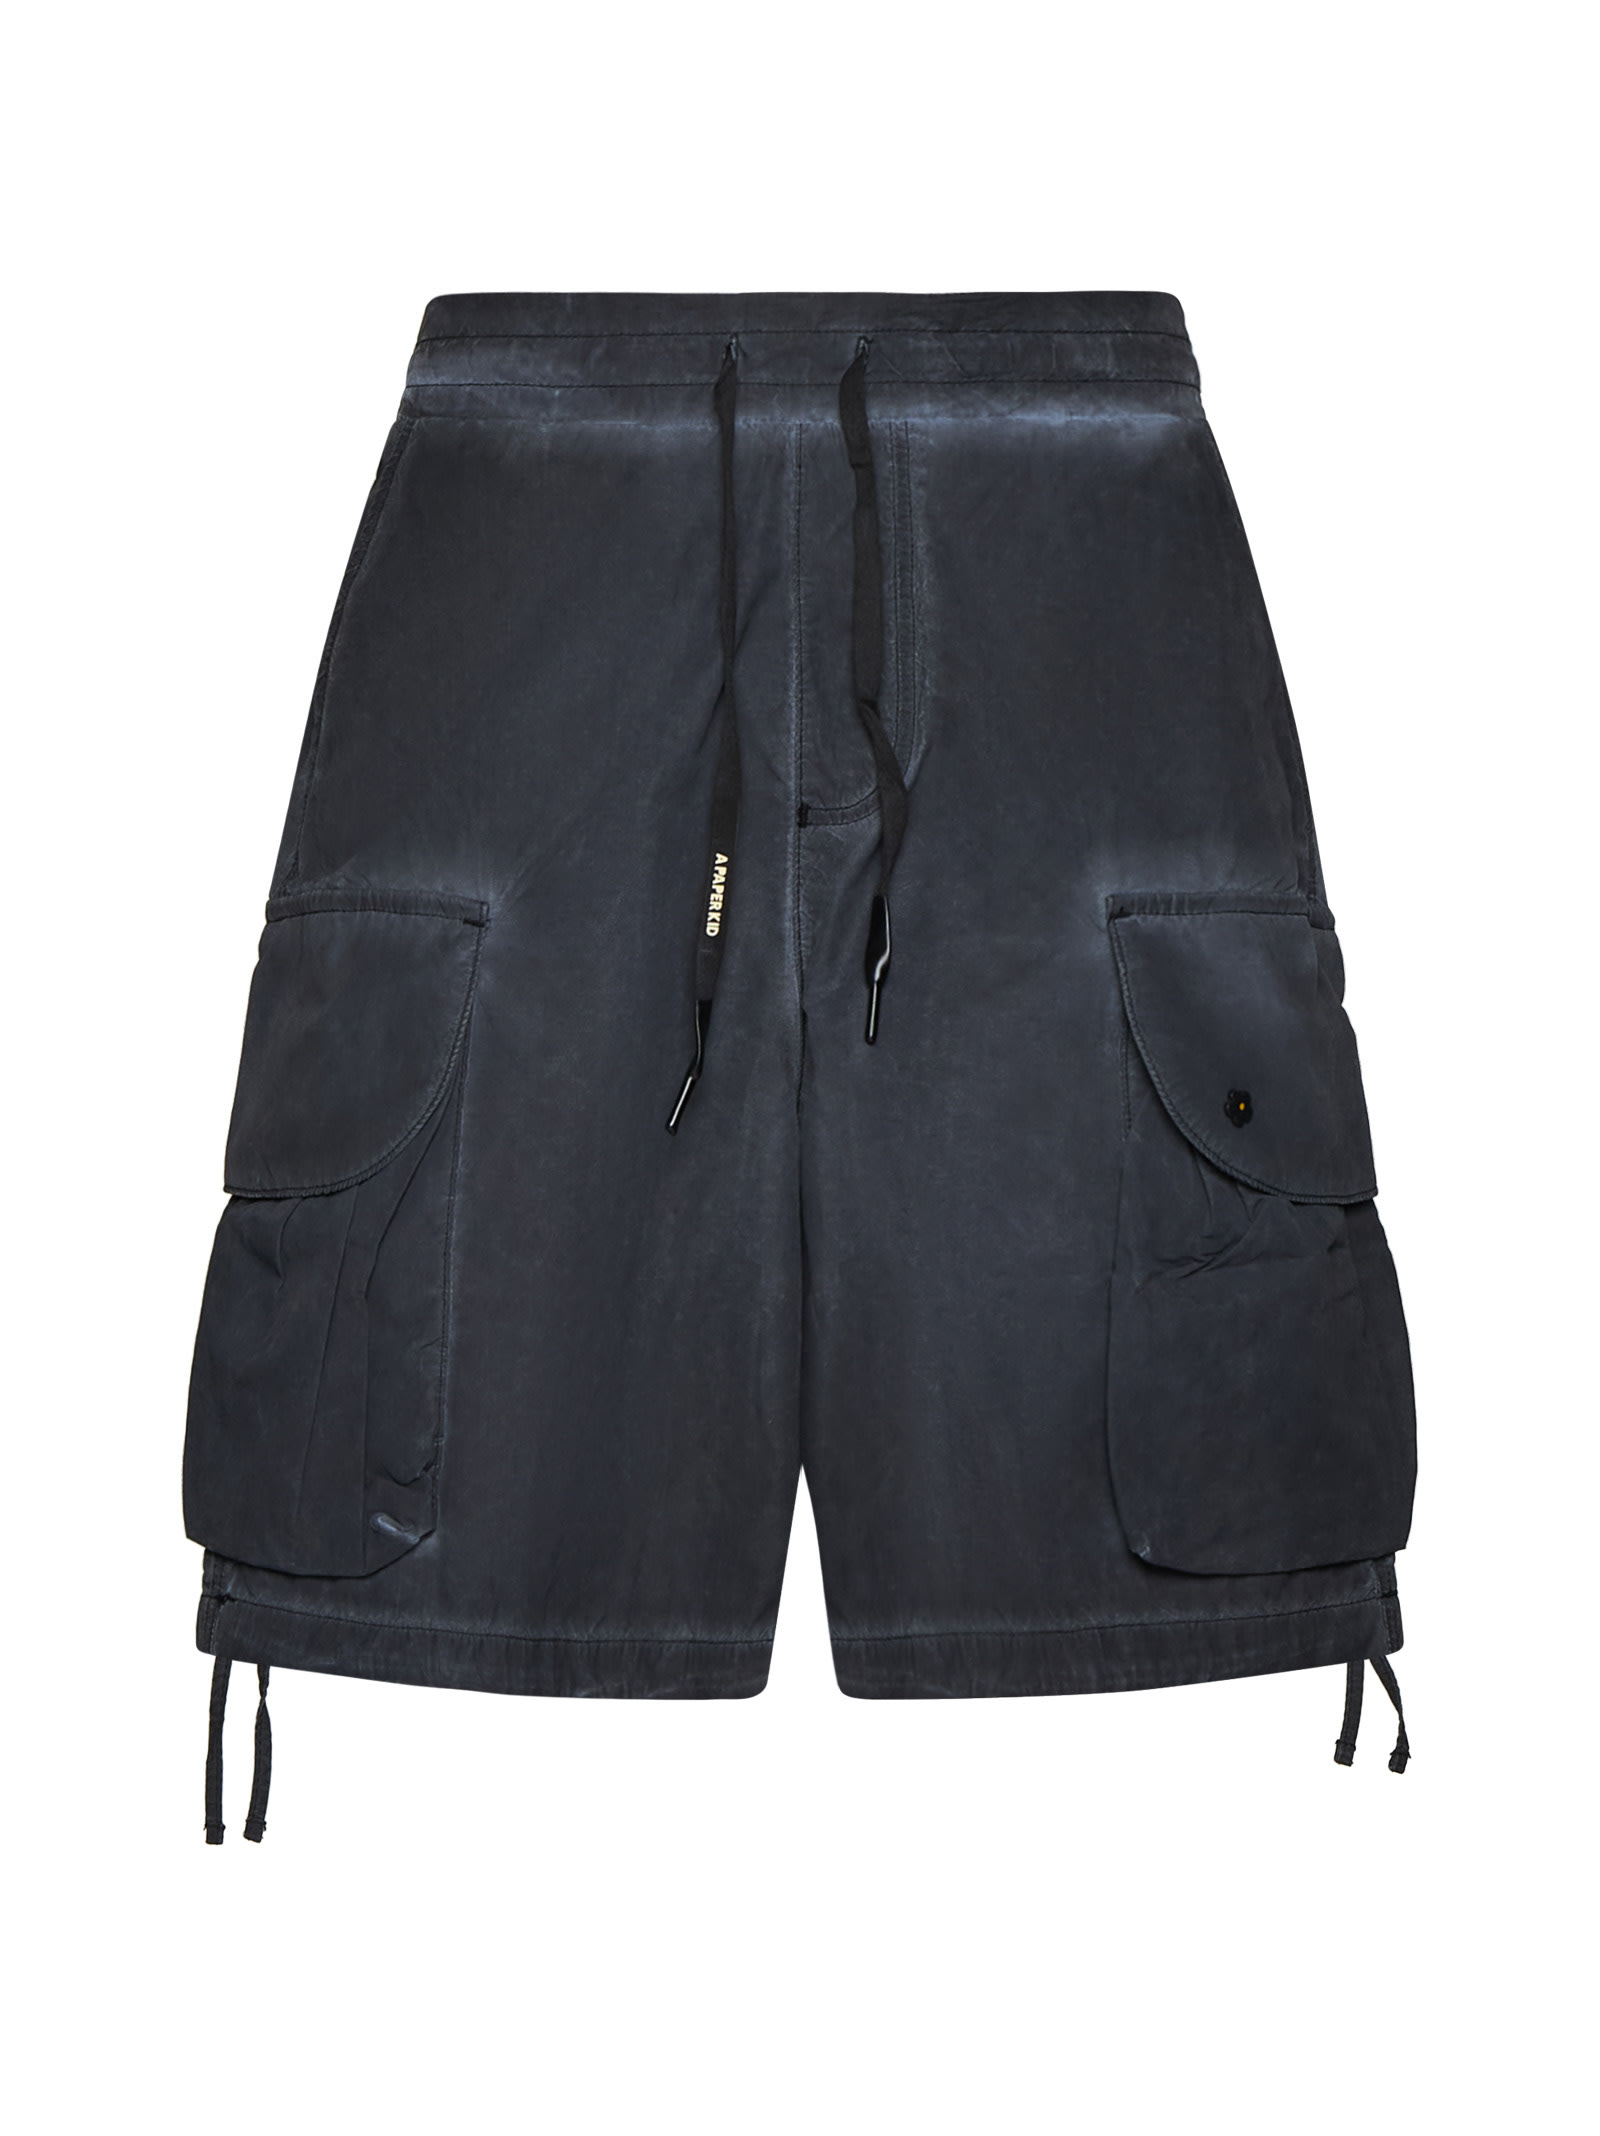 Shop A Paper Kid Shorts In Black